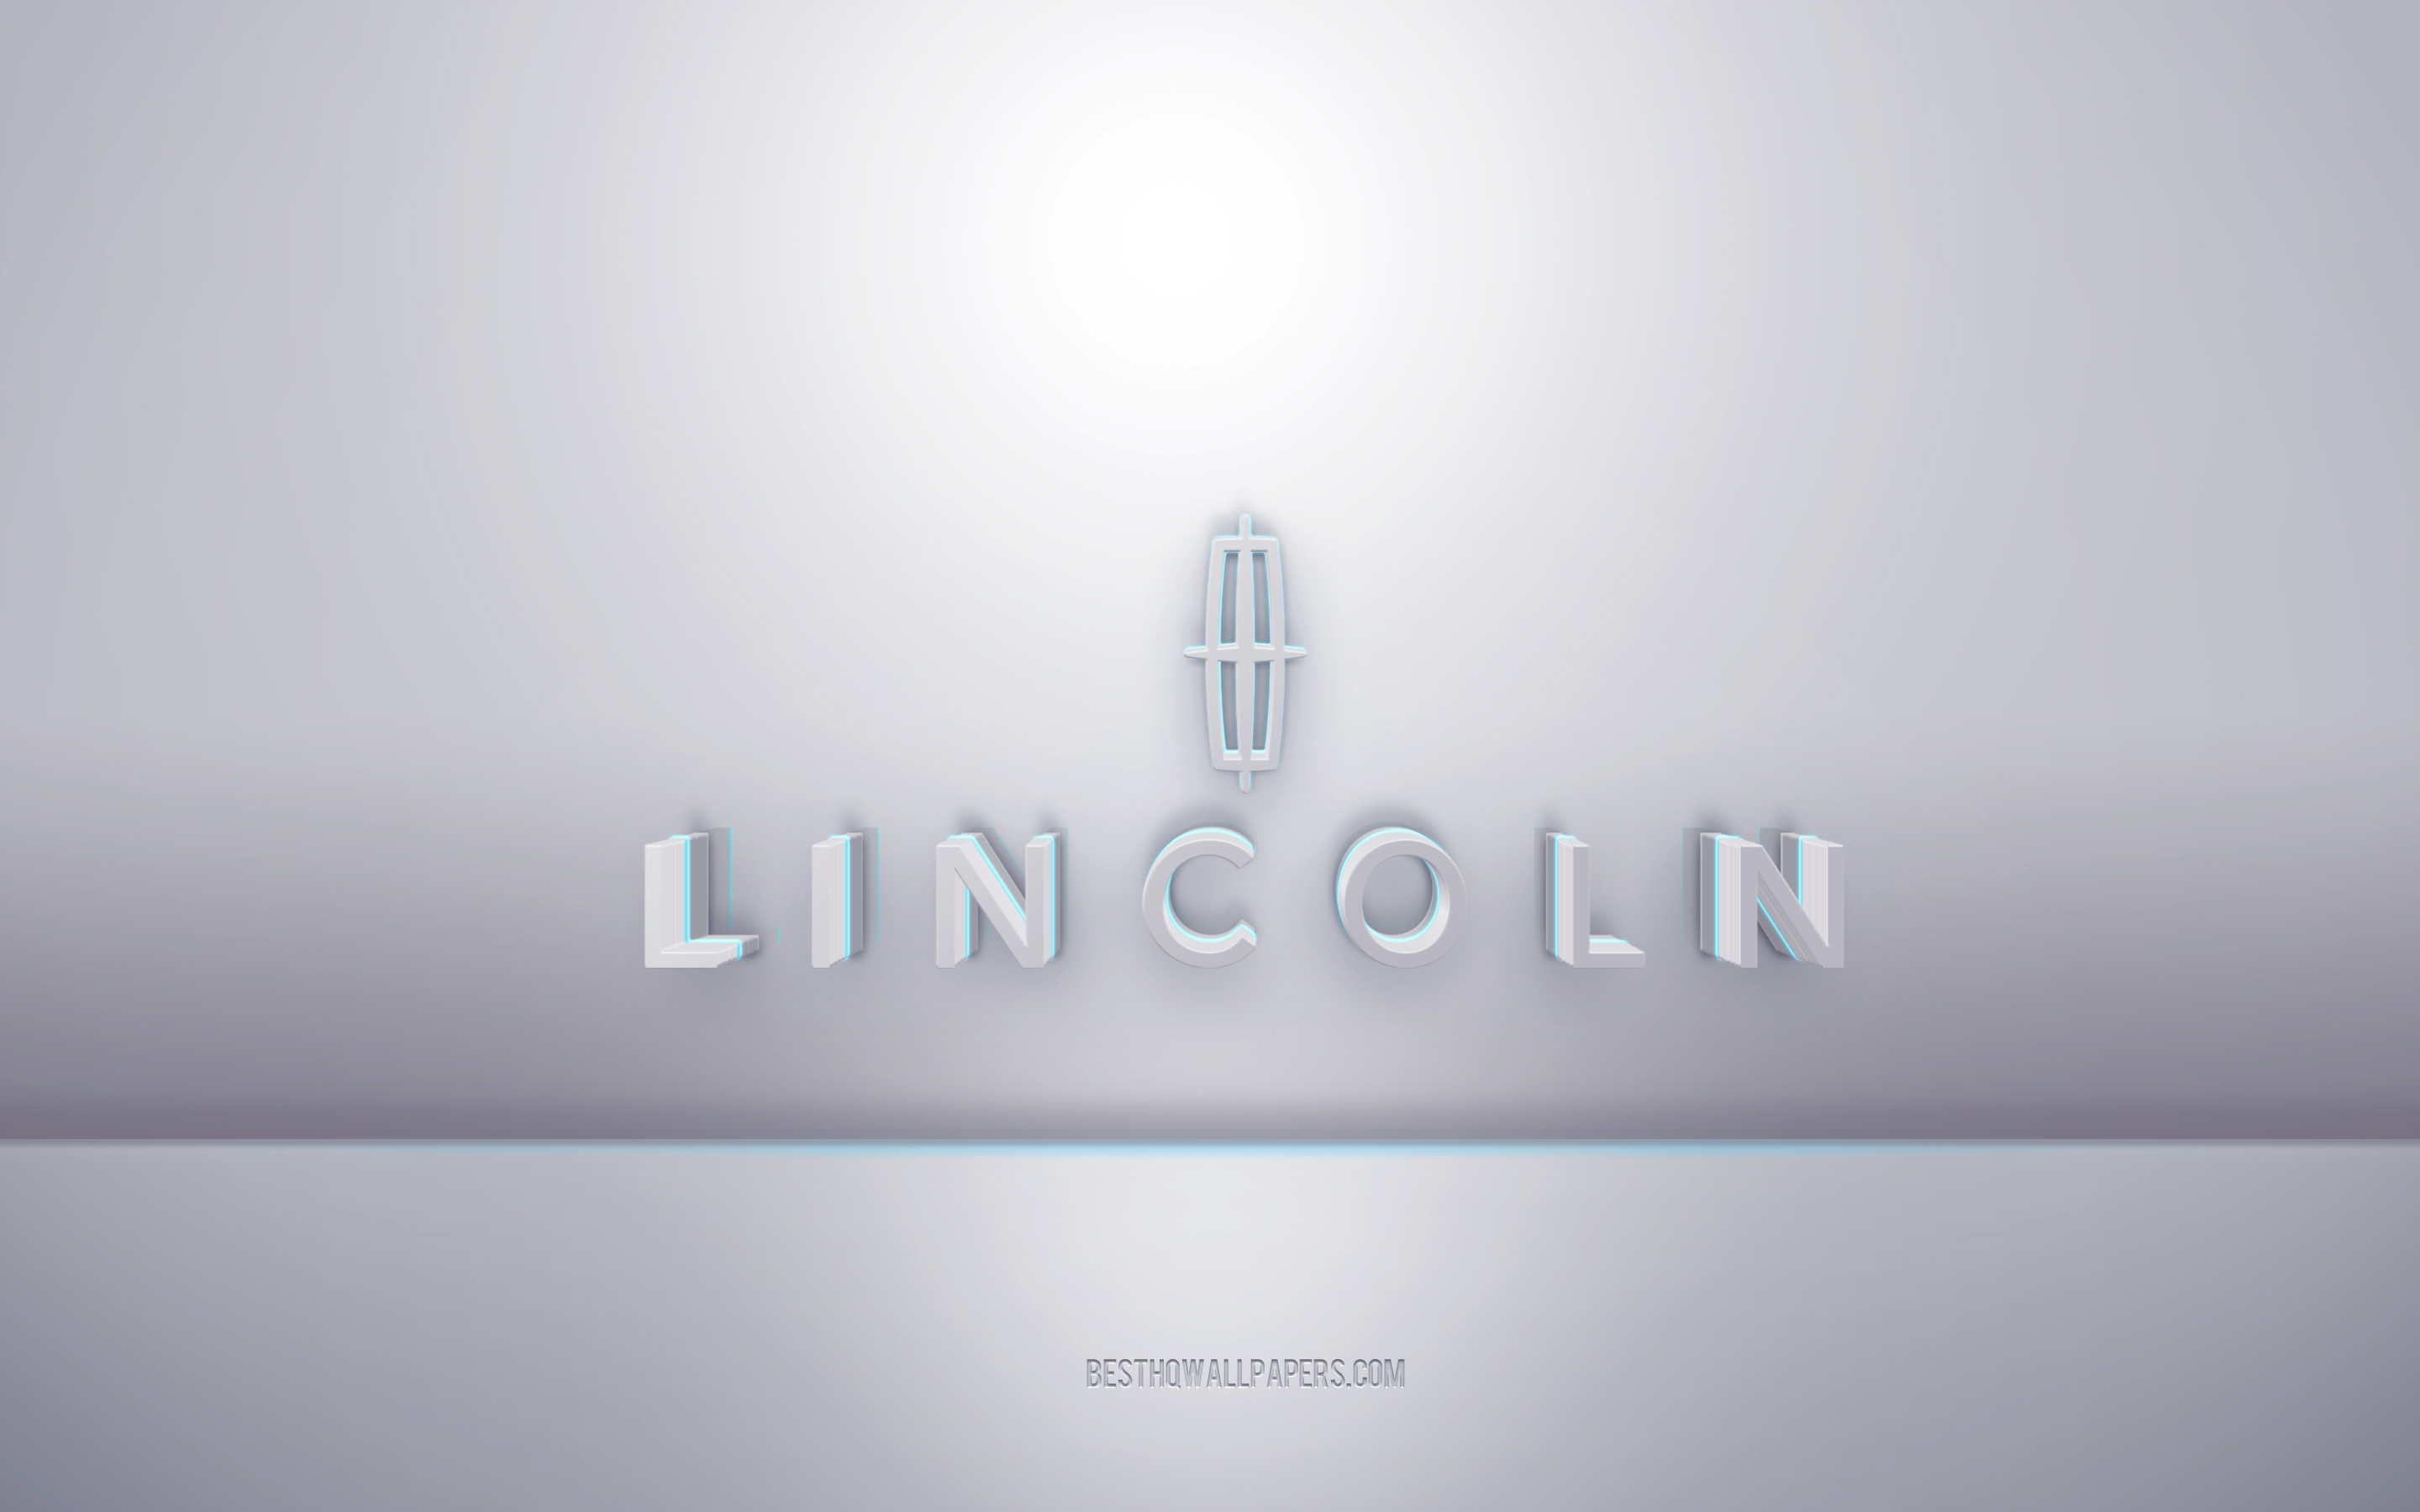 Download wallpaper Lincoln 3D white logo, gray background, Lincoln logo, creative 3D art, Lincoln, 3D emblem for desktop with resolution 2880x1800. High Quality HD picture wallpaper